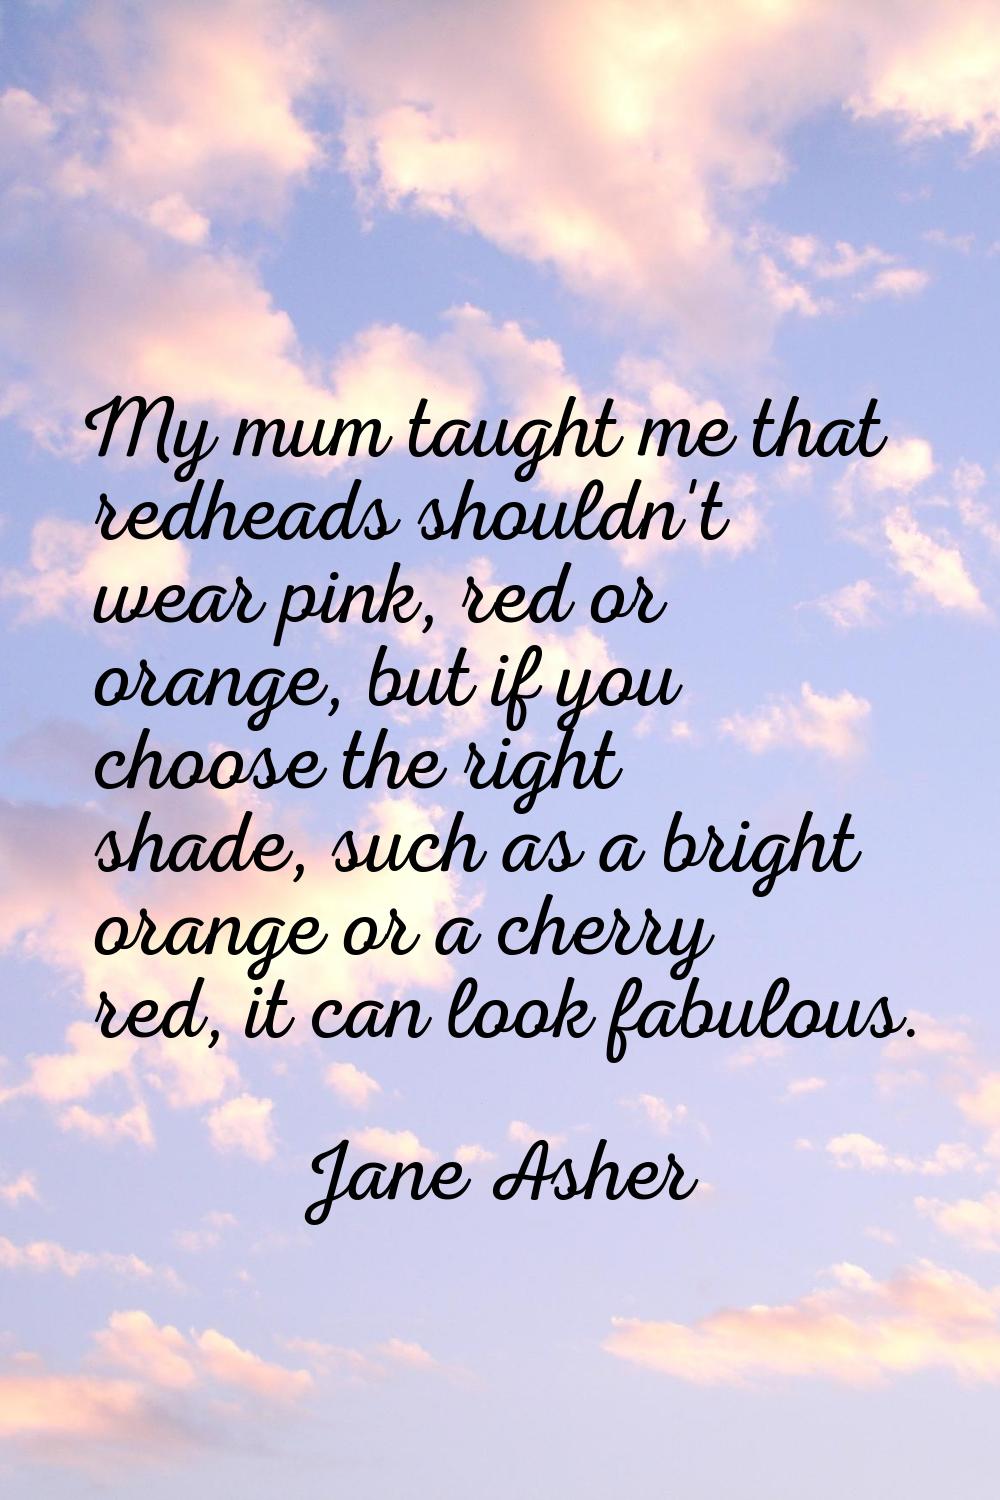 My mum taught me that redheads shouldn't wear pink, red or orange, but if you choose the right shad